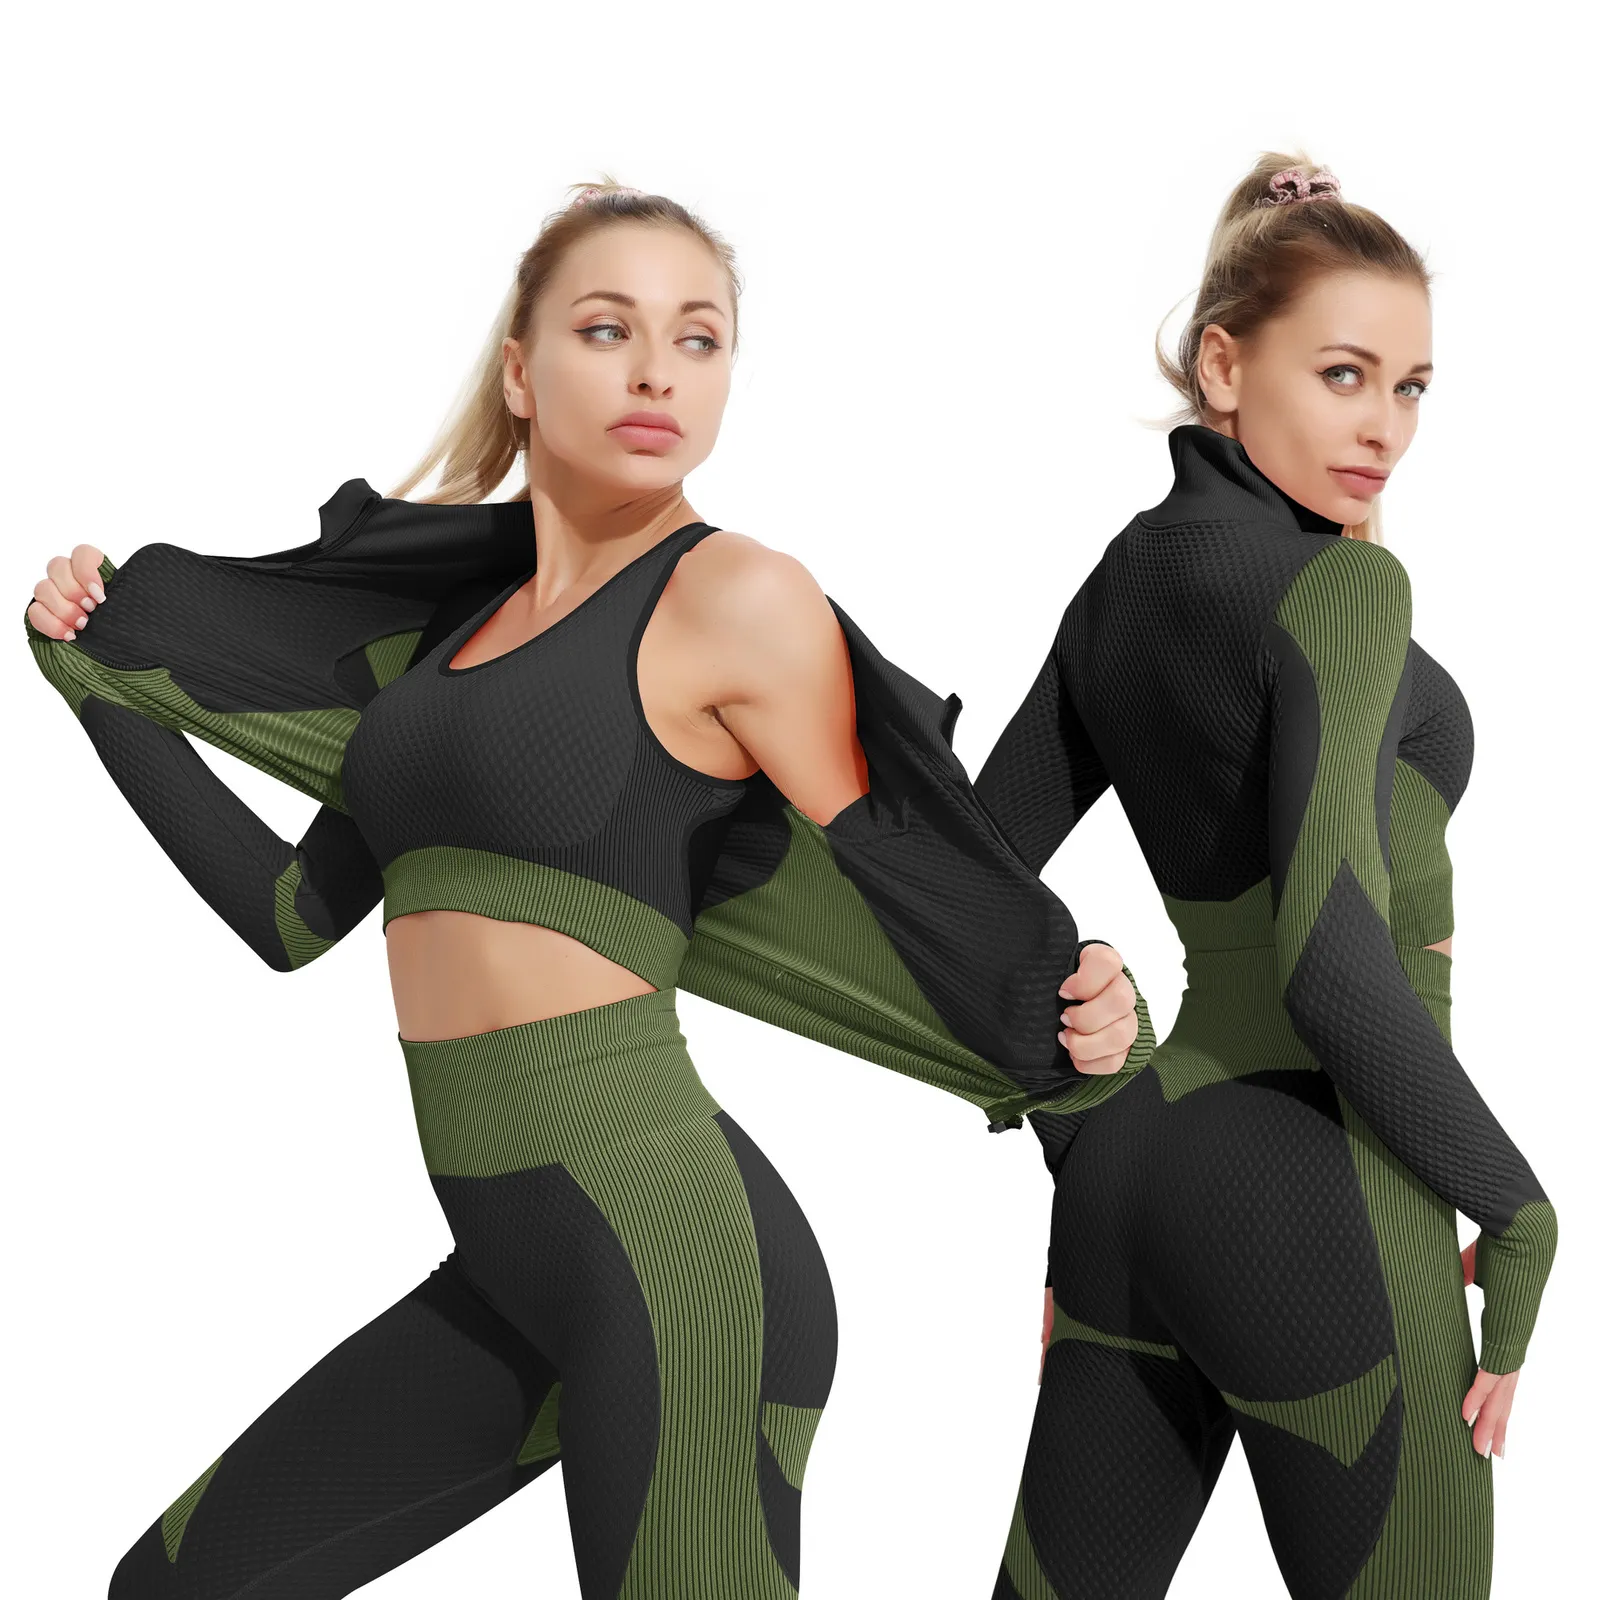 Yoga Outfits 2 3 Pieces Set Bar High Waisted Tight Pants Gym Exercise Clothing Suitable Sportswear For Women Zipper Jacket Leggings Suit 230310